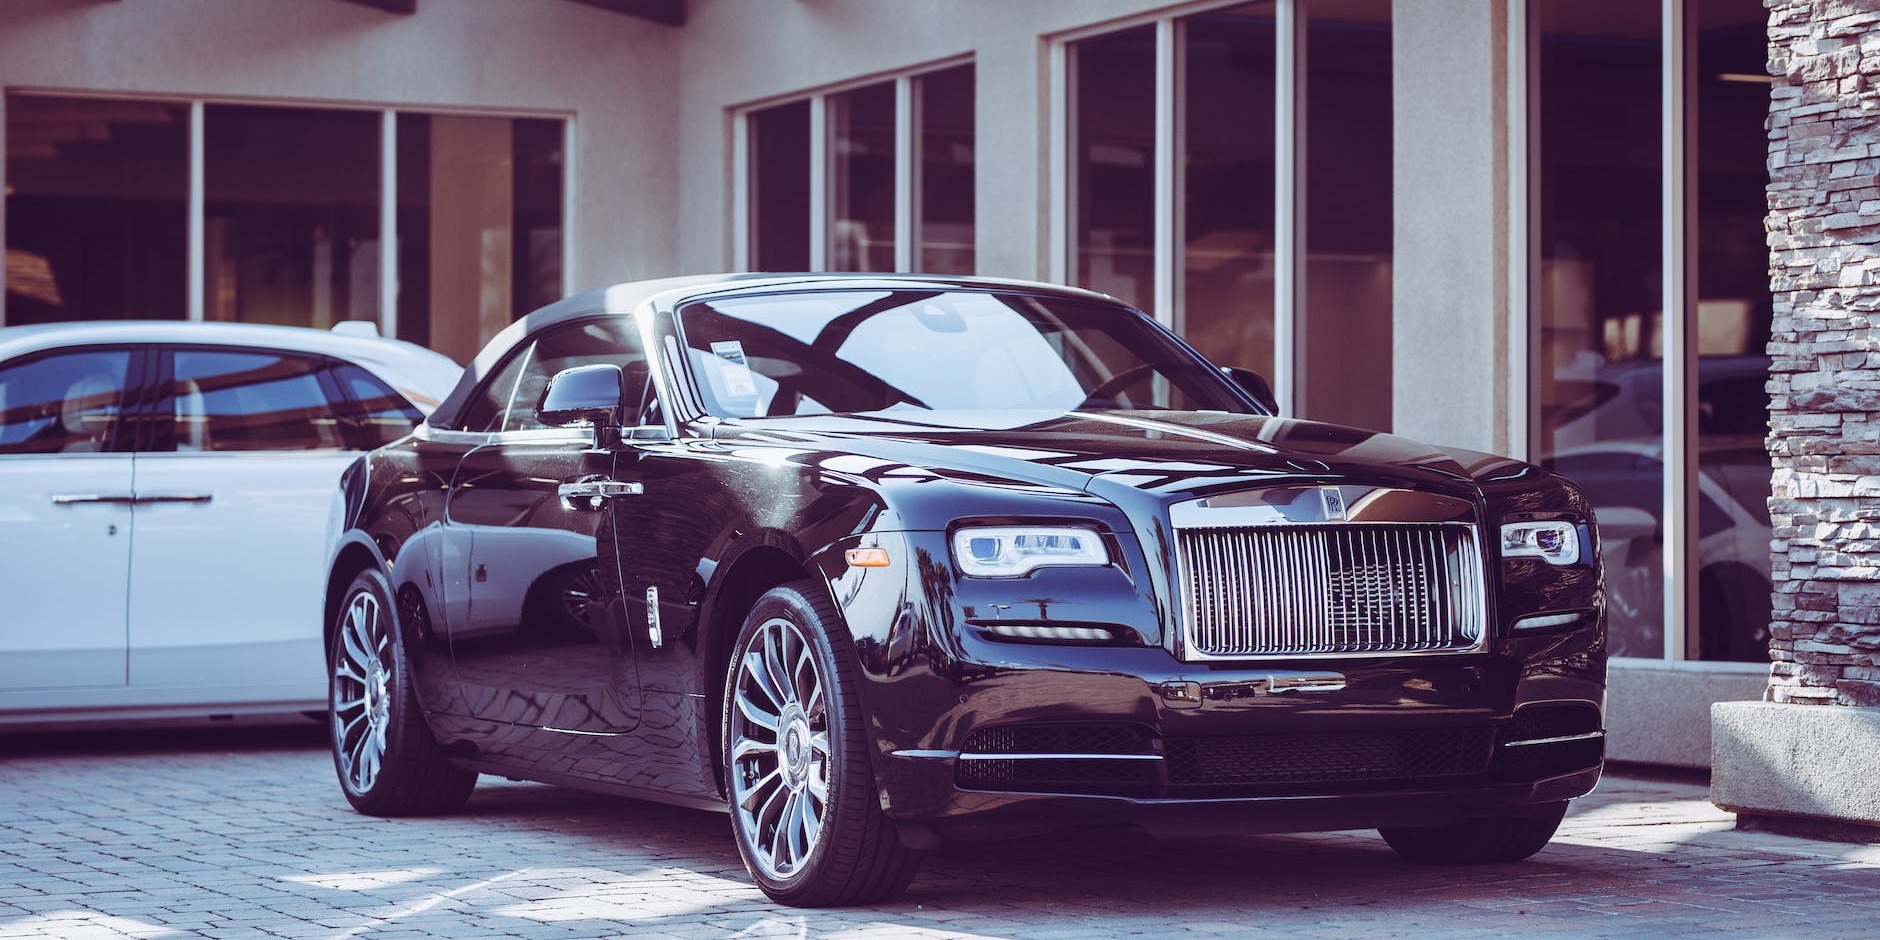 The Top 5 Reasons Why Hiring a Rolls Royce in London is Worth it